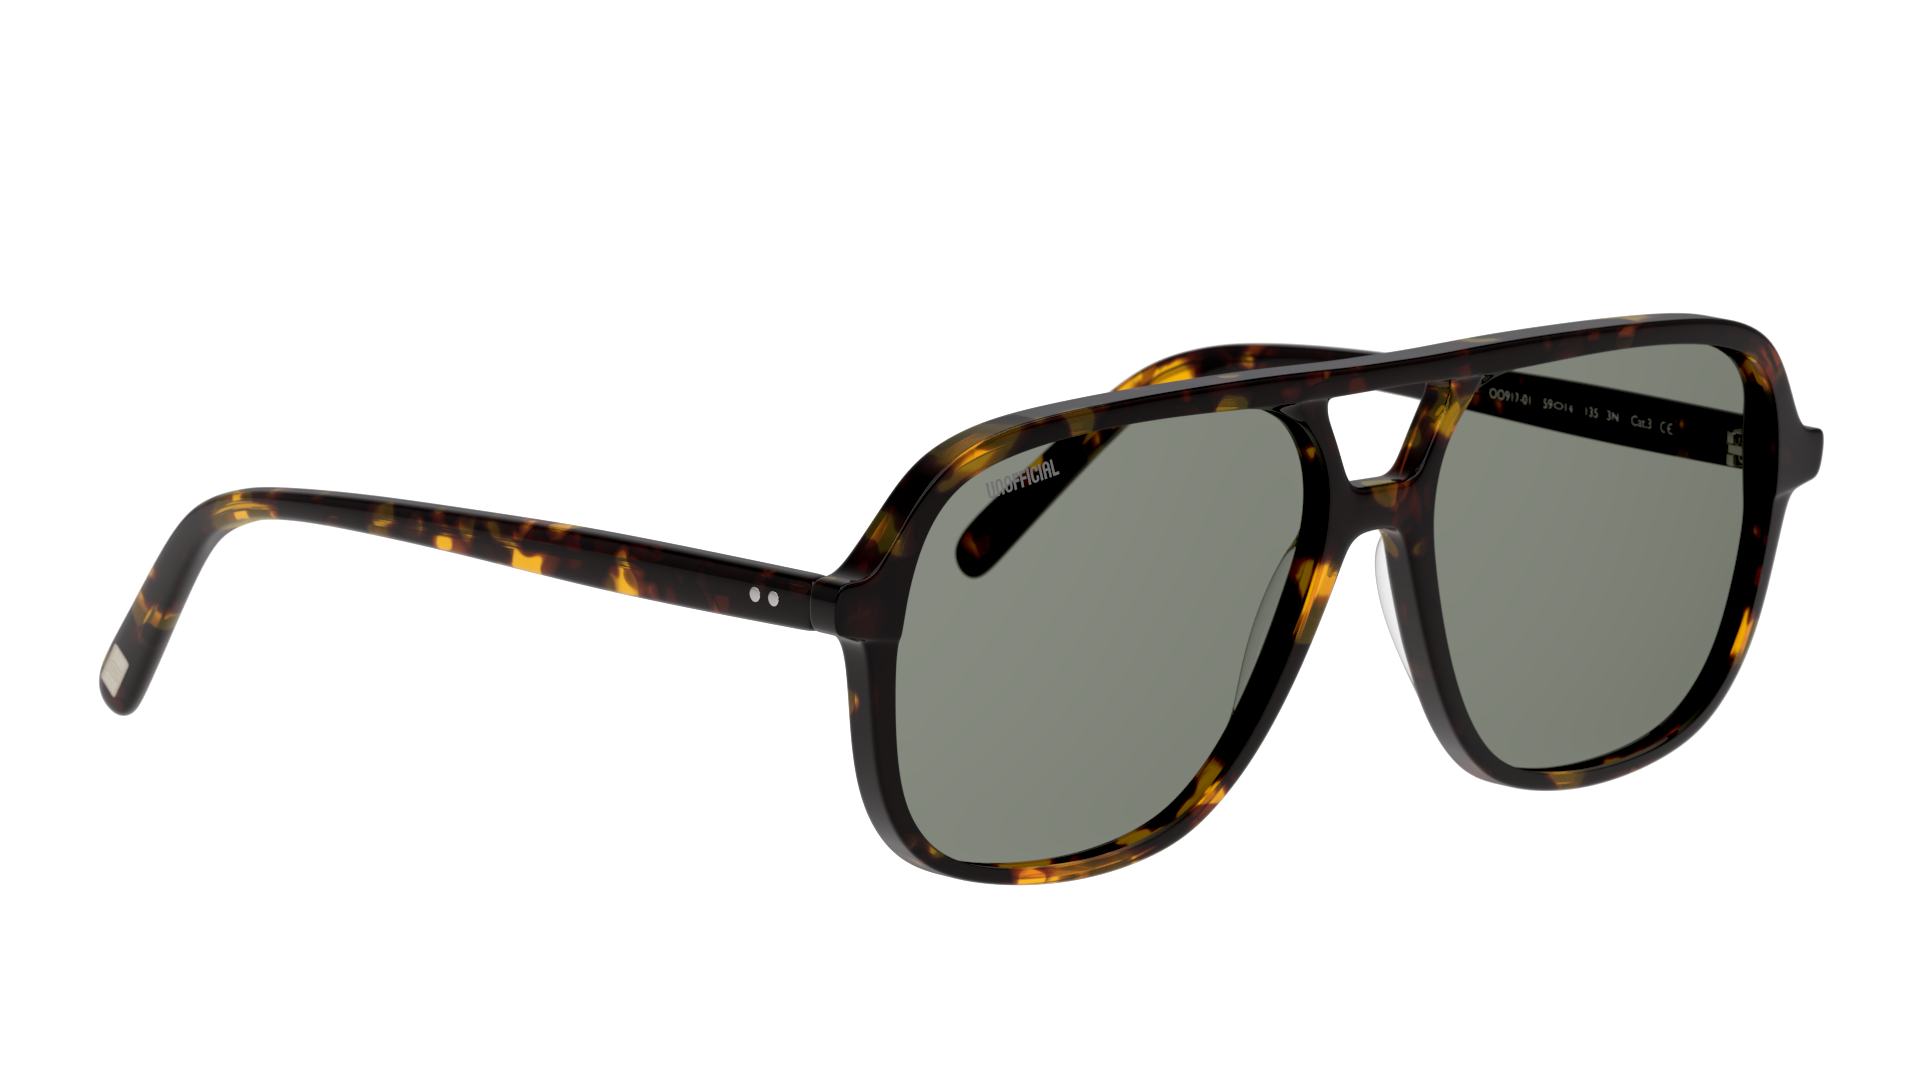 Angle_Right01 Unofficial UNSM0014 (HHE0) Sunglasses Green / Tortoise Shell